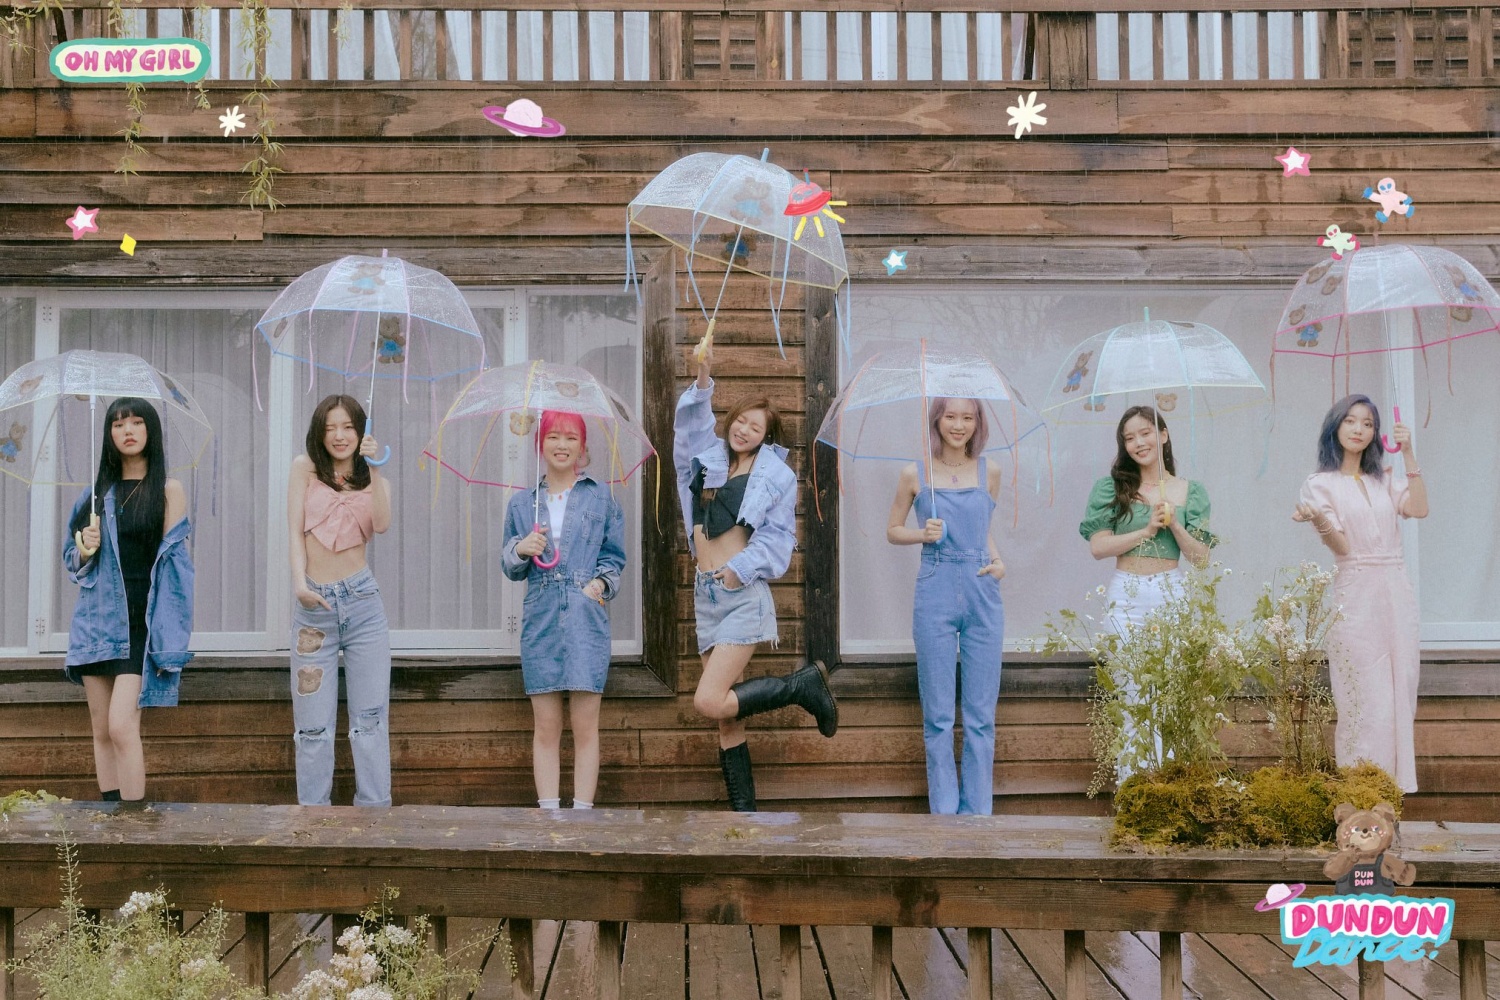 OH MY GIRL, 'Dear OHMYGIRL' first concept photo released